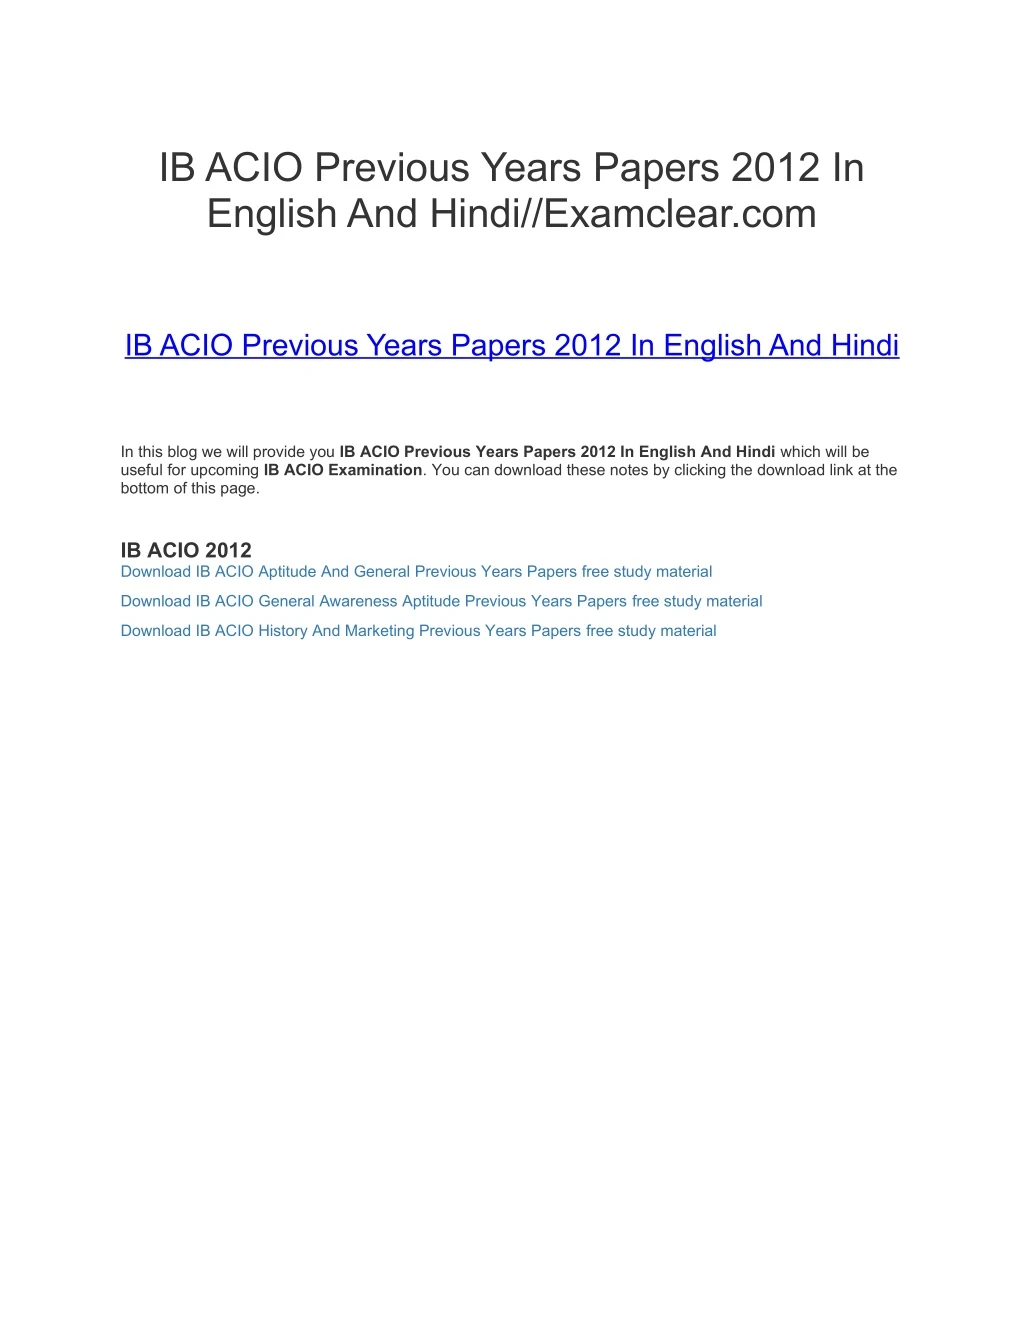 ib acio previous years papers 2012 in english